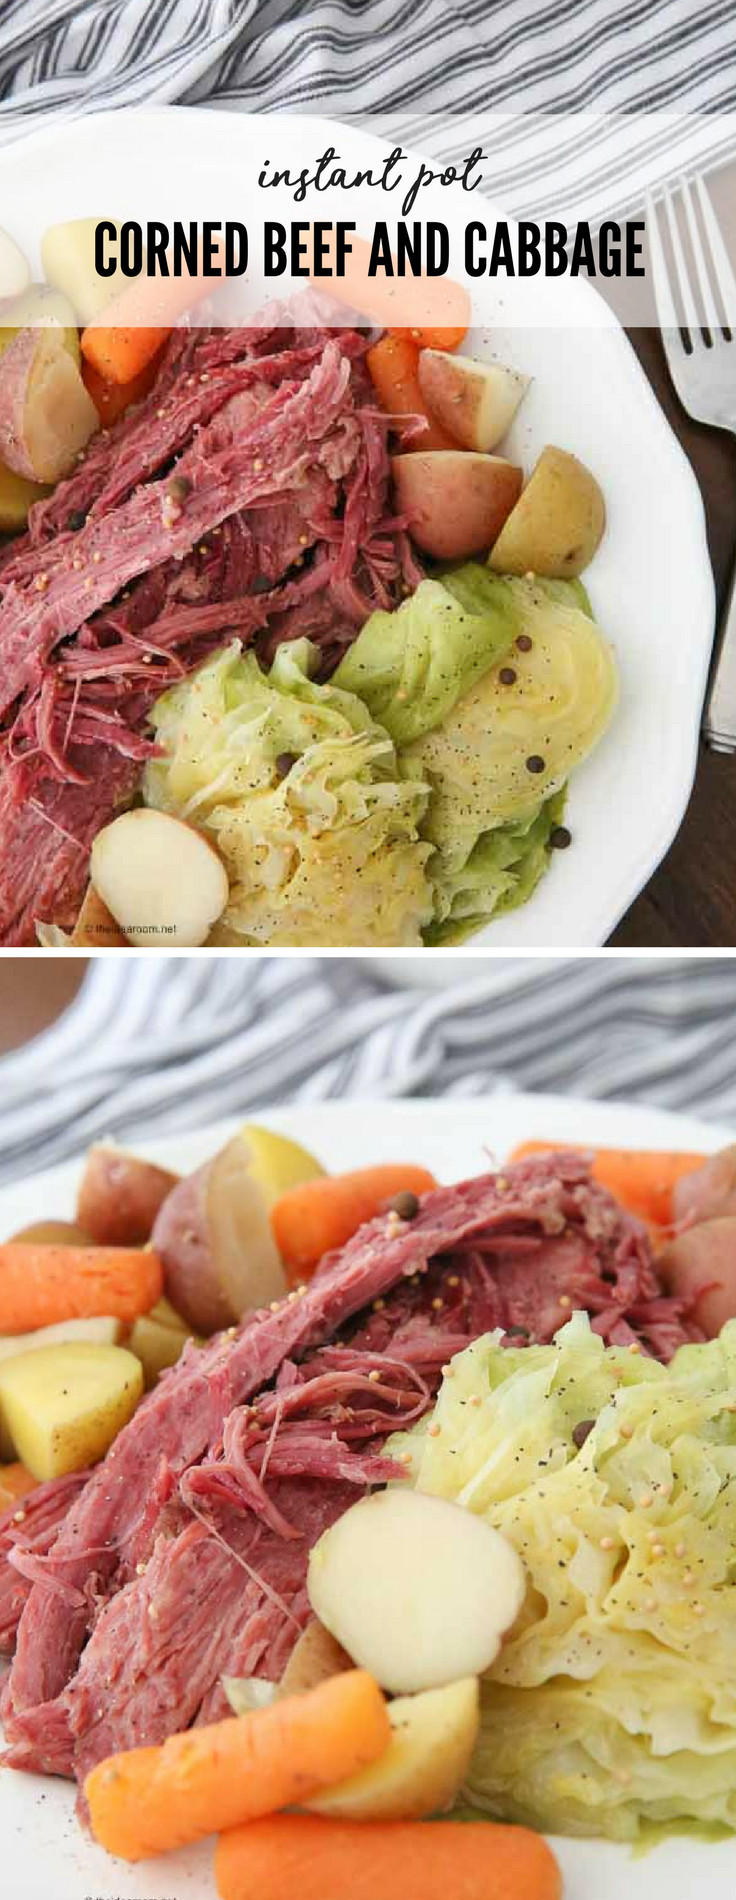 Instant Pot Corned Beef And Cabbage
 Instant Pot Corned Beef and Cabbage Recipe